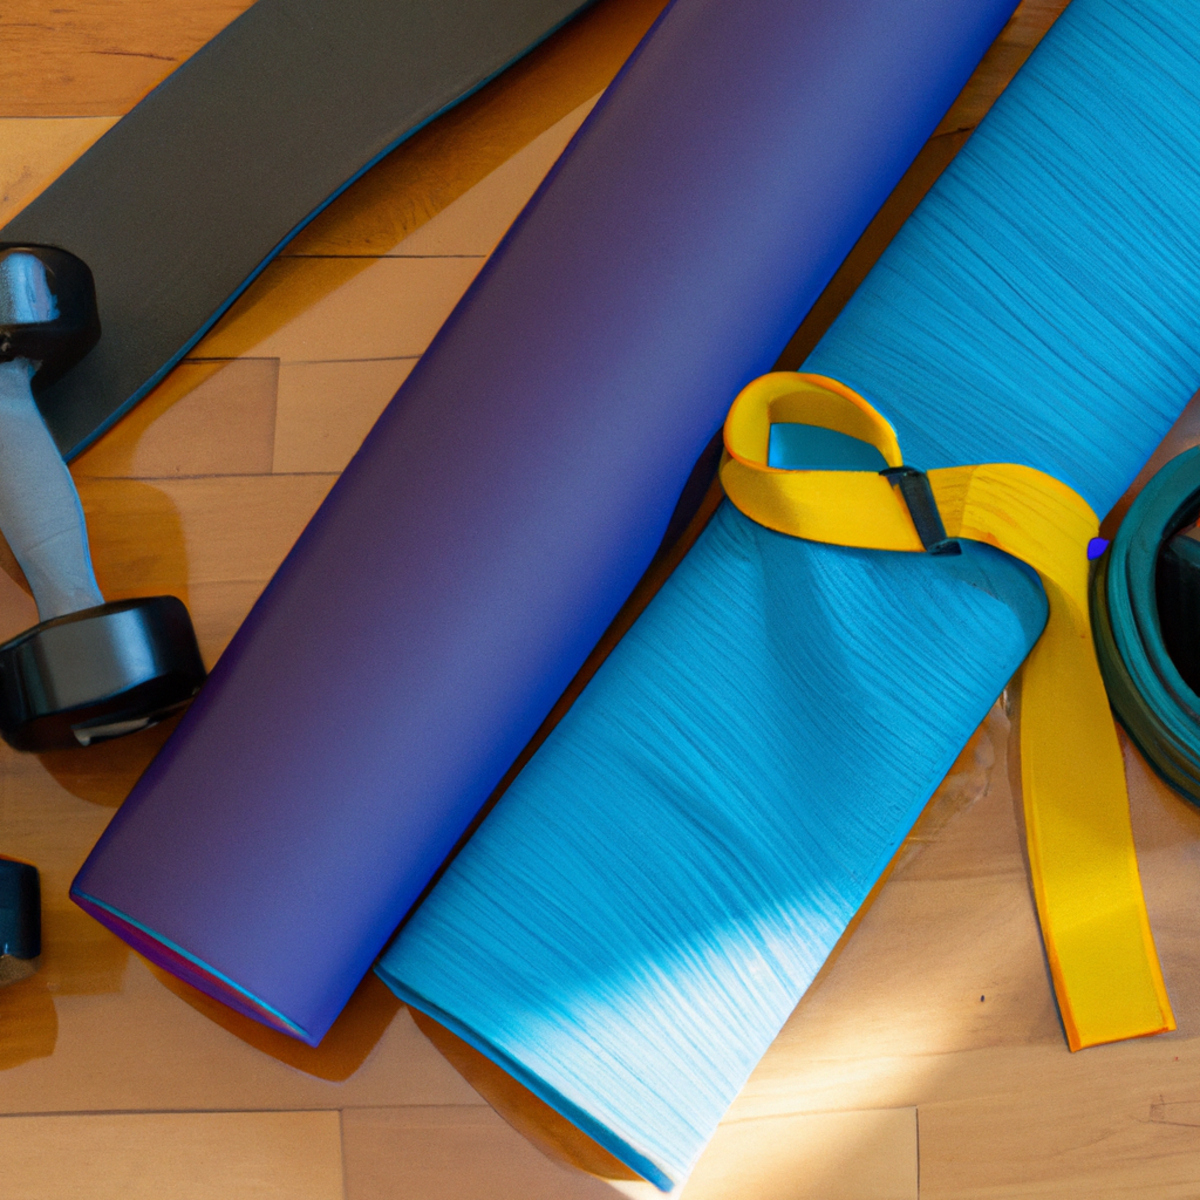 The photo shows a set of dumbbells, a resistance band, and a yoga mat arranged neatly on a wooden floor. The dumbbells are of different weights, ranging from light to heavy, and are placed on either side of the resistance band. The band is stretched out in the middle, forming a loop. The yoga mat is rolled up and placed next to the dumbbells. The lighting in the photo is bright and natural, highlighting the texture of the wooden floor and the shiny surface of the dumbbells. The composition of the photo suggests that these objects are essential tools for resistance training and invites the reader to explore the benefits of this type of exercise.